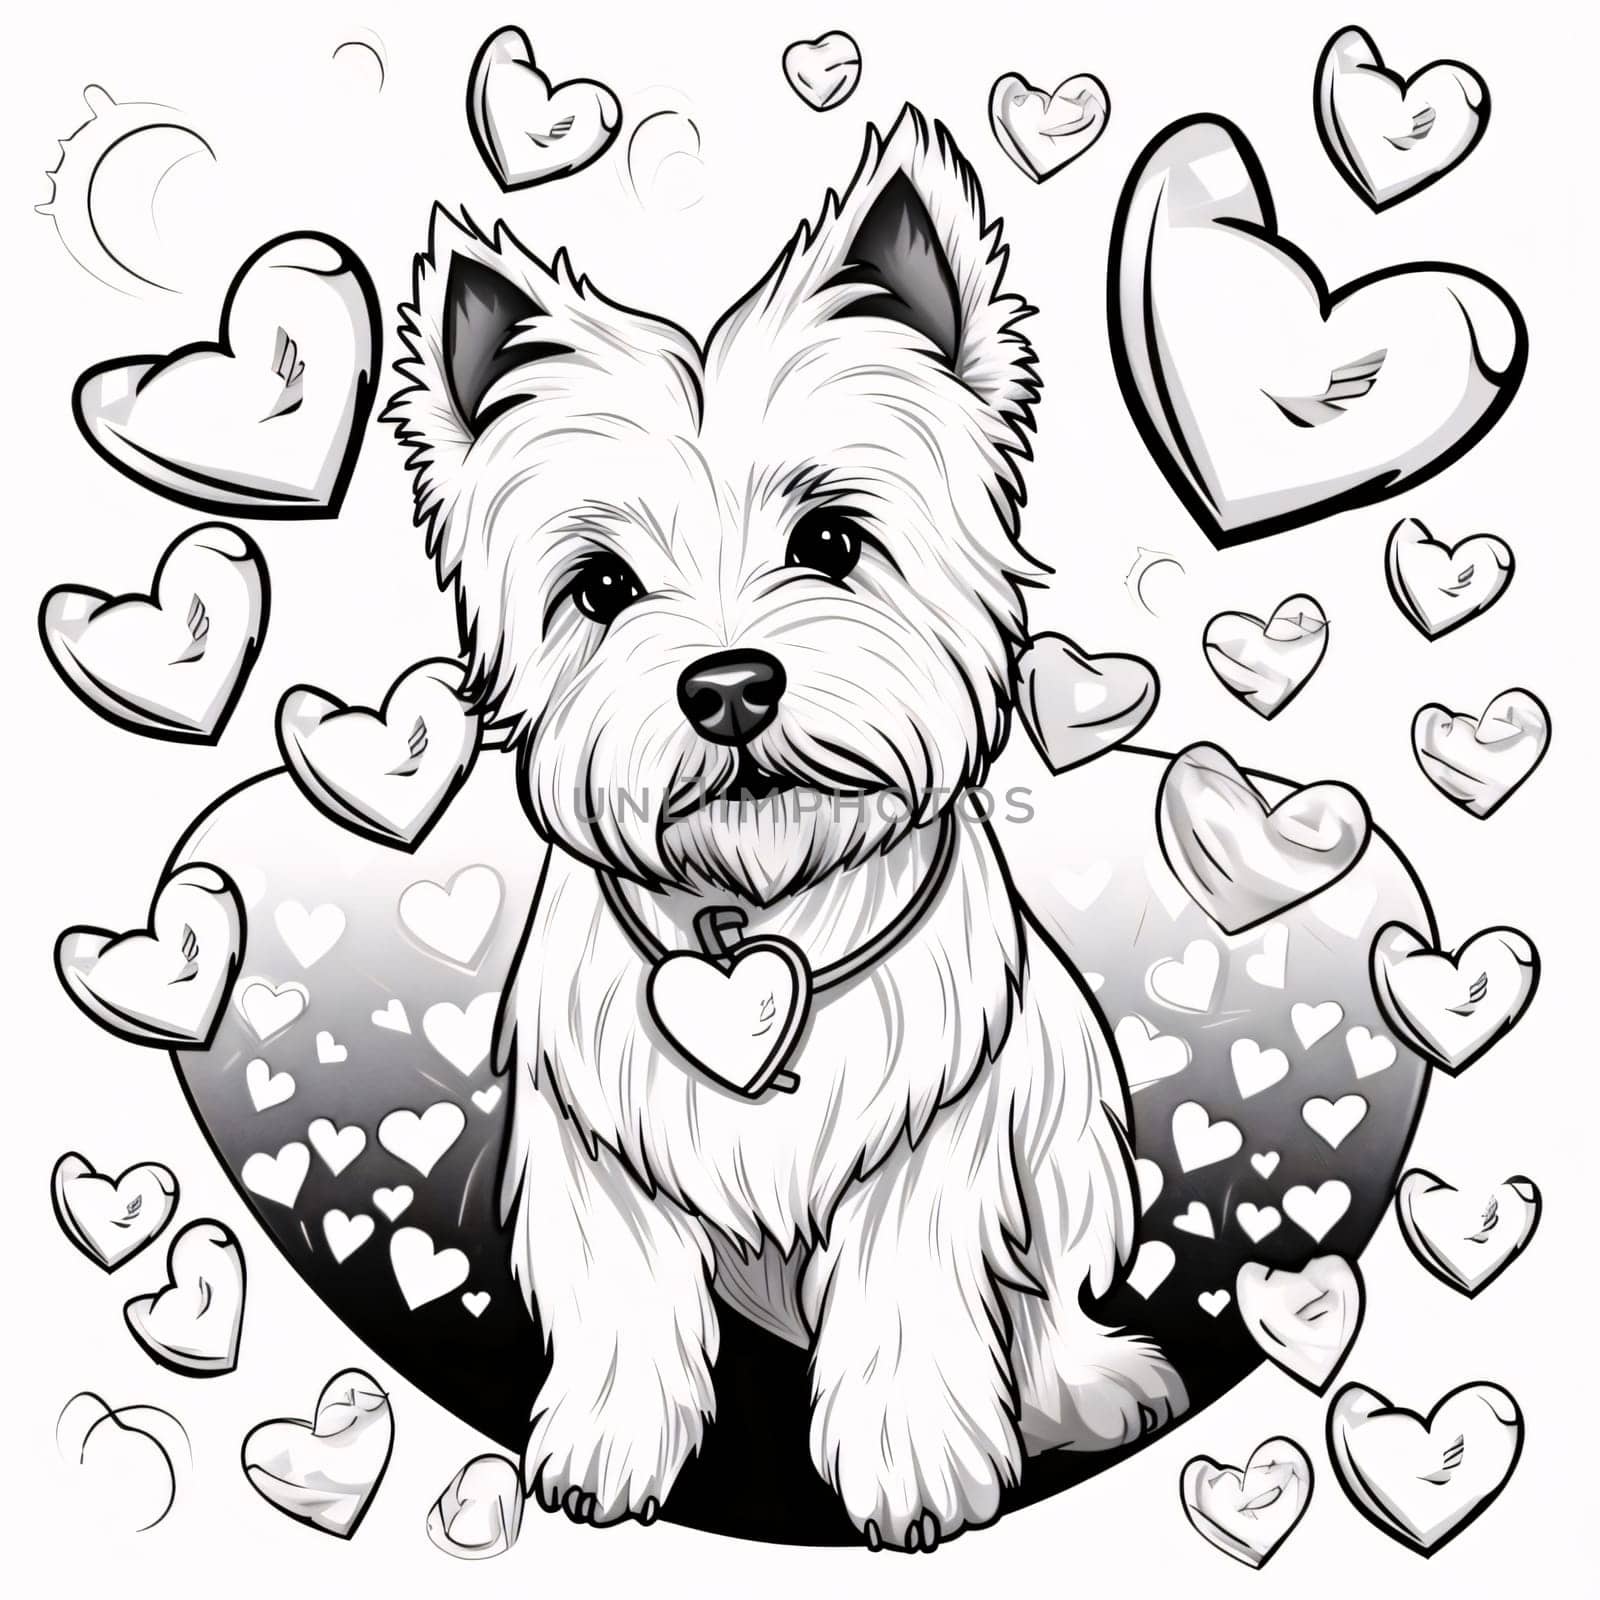 Black and White coloring card of a dog with hearts all around. Heart as a symbol of affection and love. The time of falling in love and love.